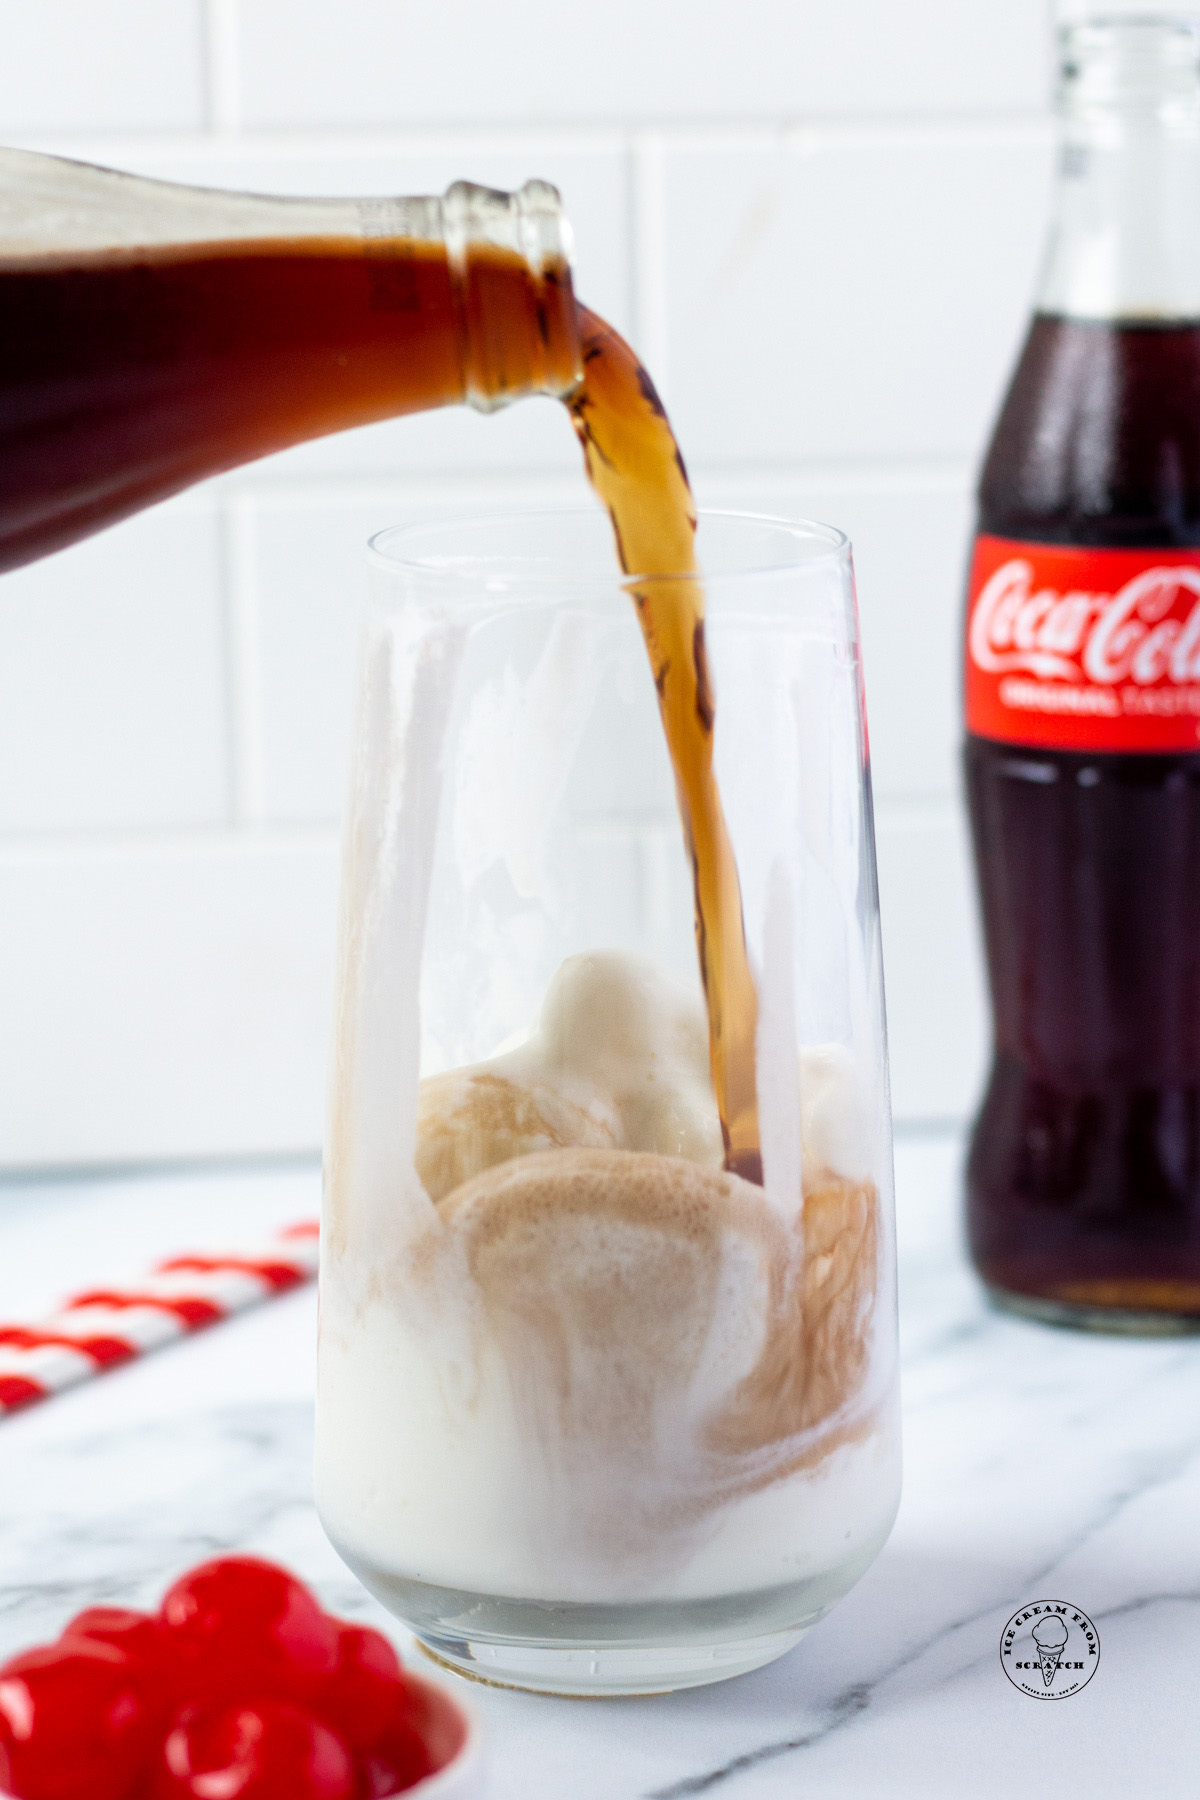 A bottle of soda being poured into a glass of ice cream to make a float